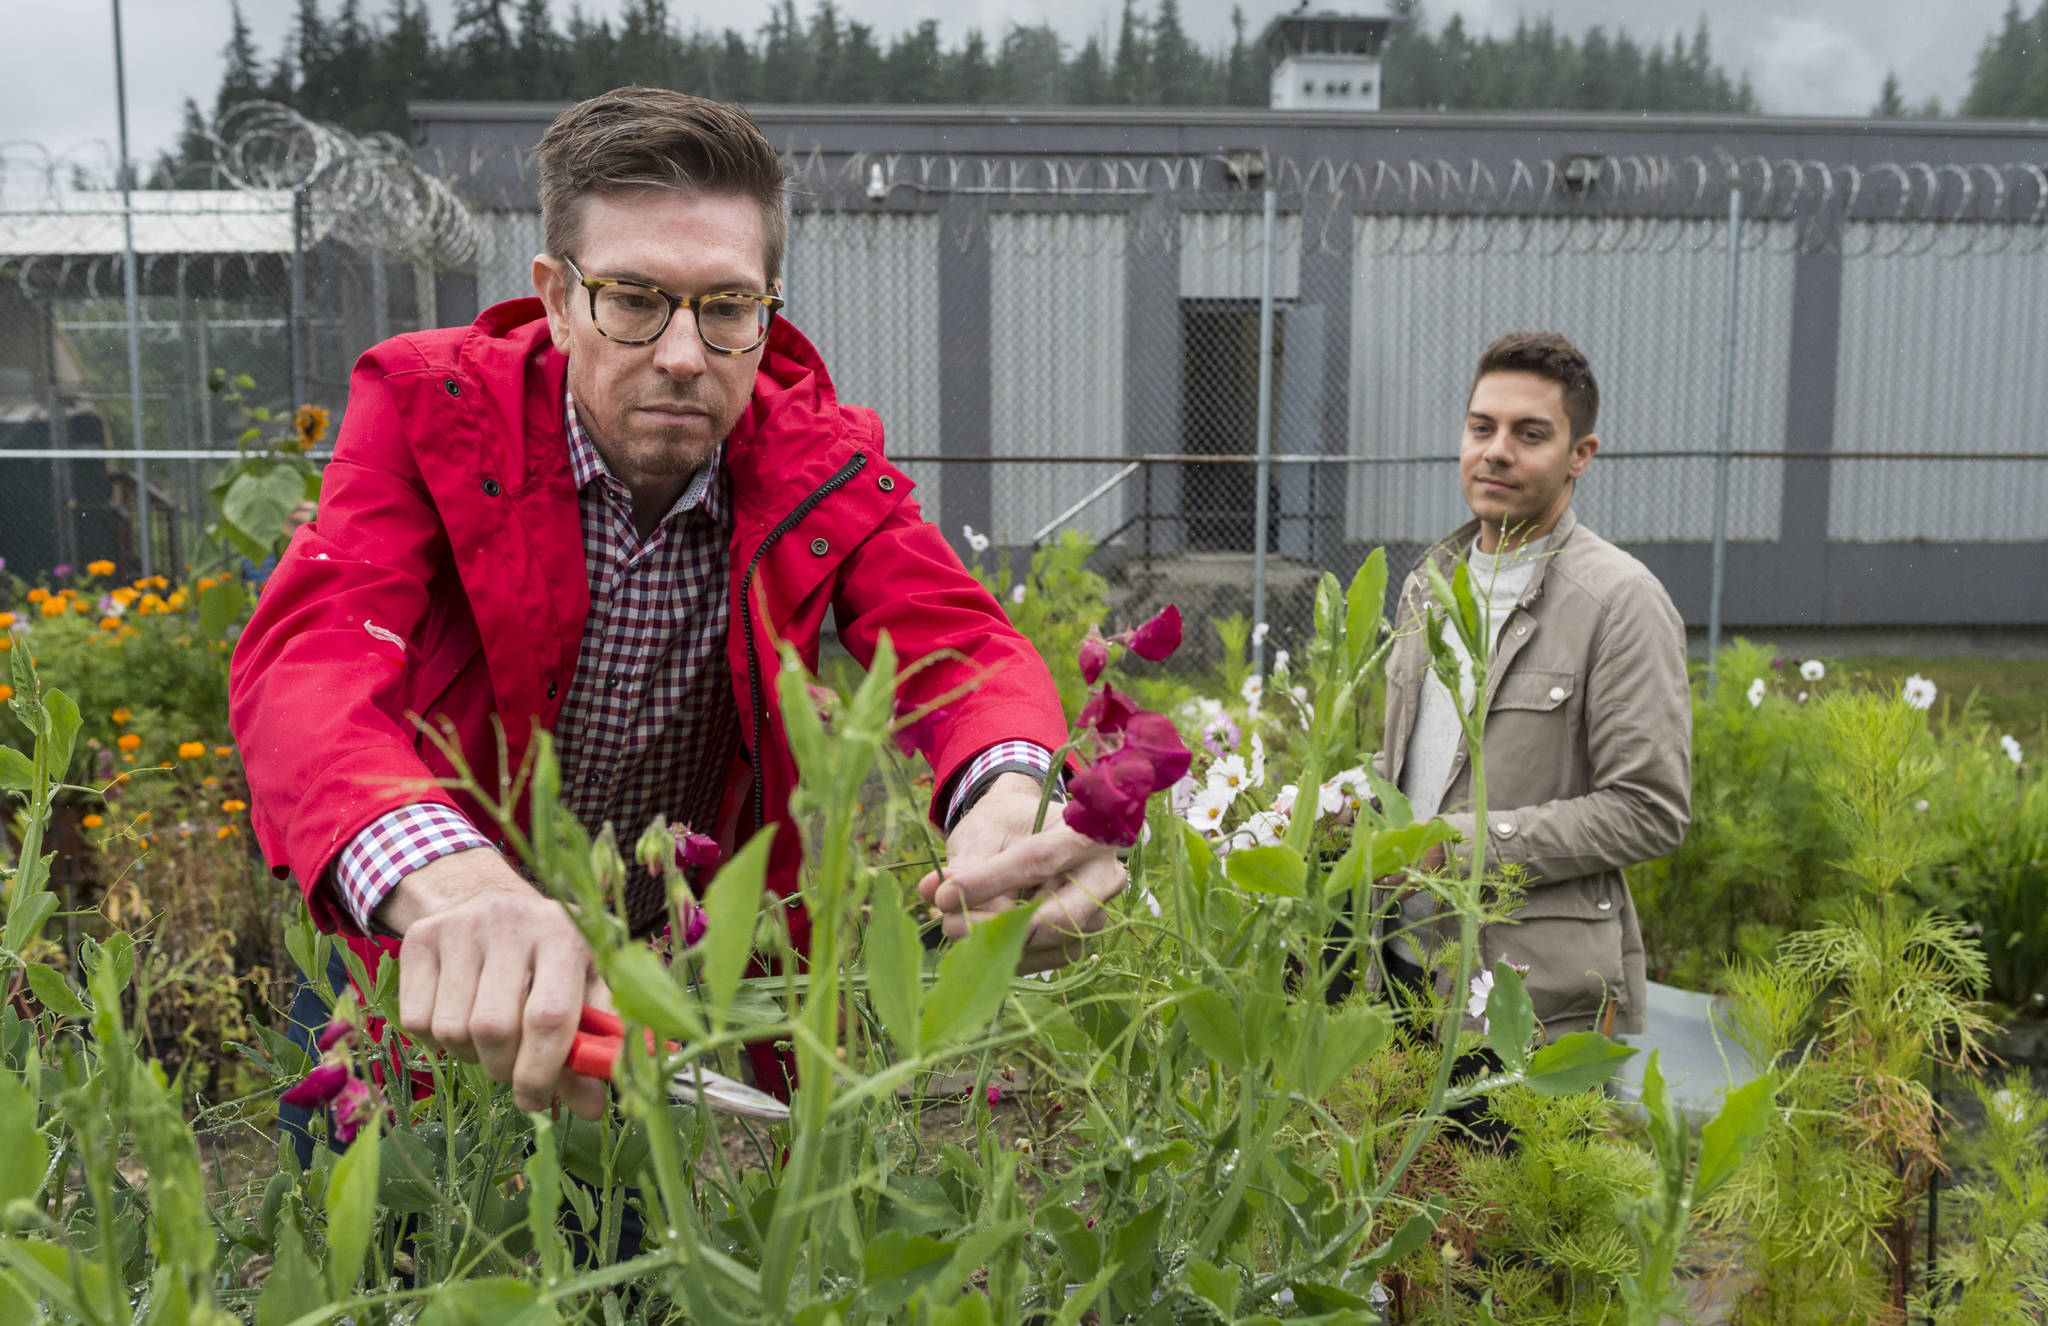 Jeremy Bauer, left, and Jason Clifton, right, of Frenchie’s Floral Studio, harvest sweet pea flowers as part of a flower-growing collaboration at Lemon Creek Correctional Center on Friday, Aug. 24, 2018. (Michael Penn | Juneau Empire)